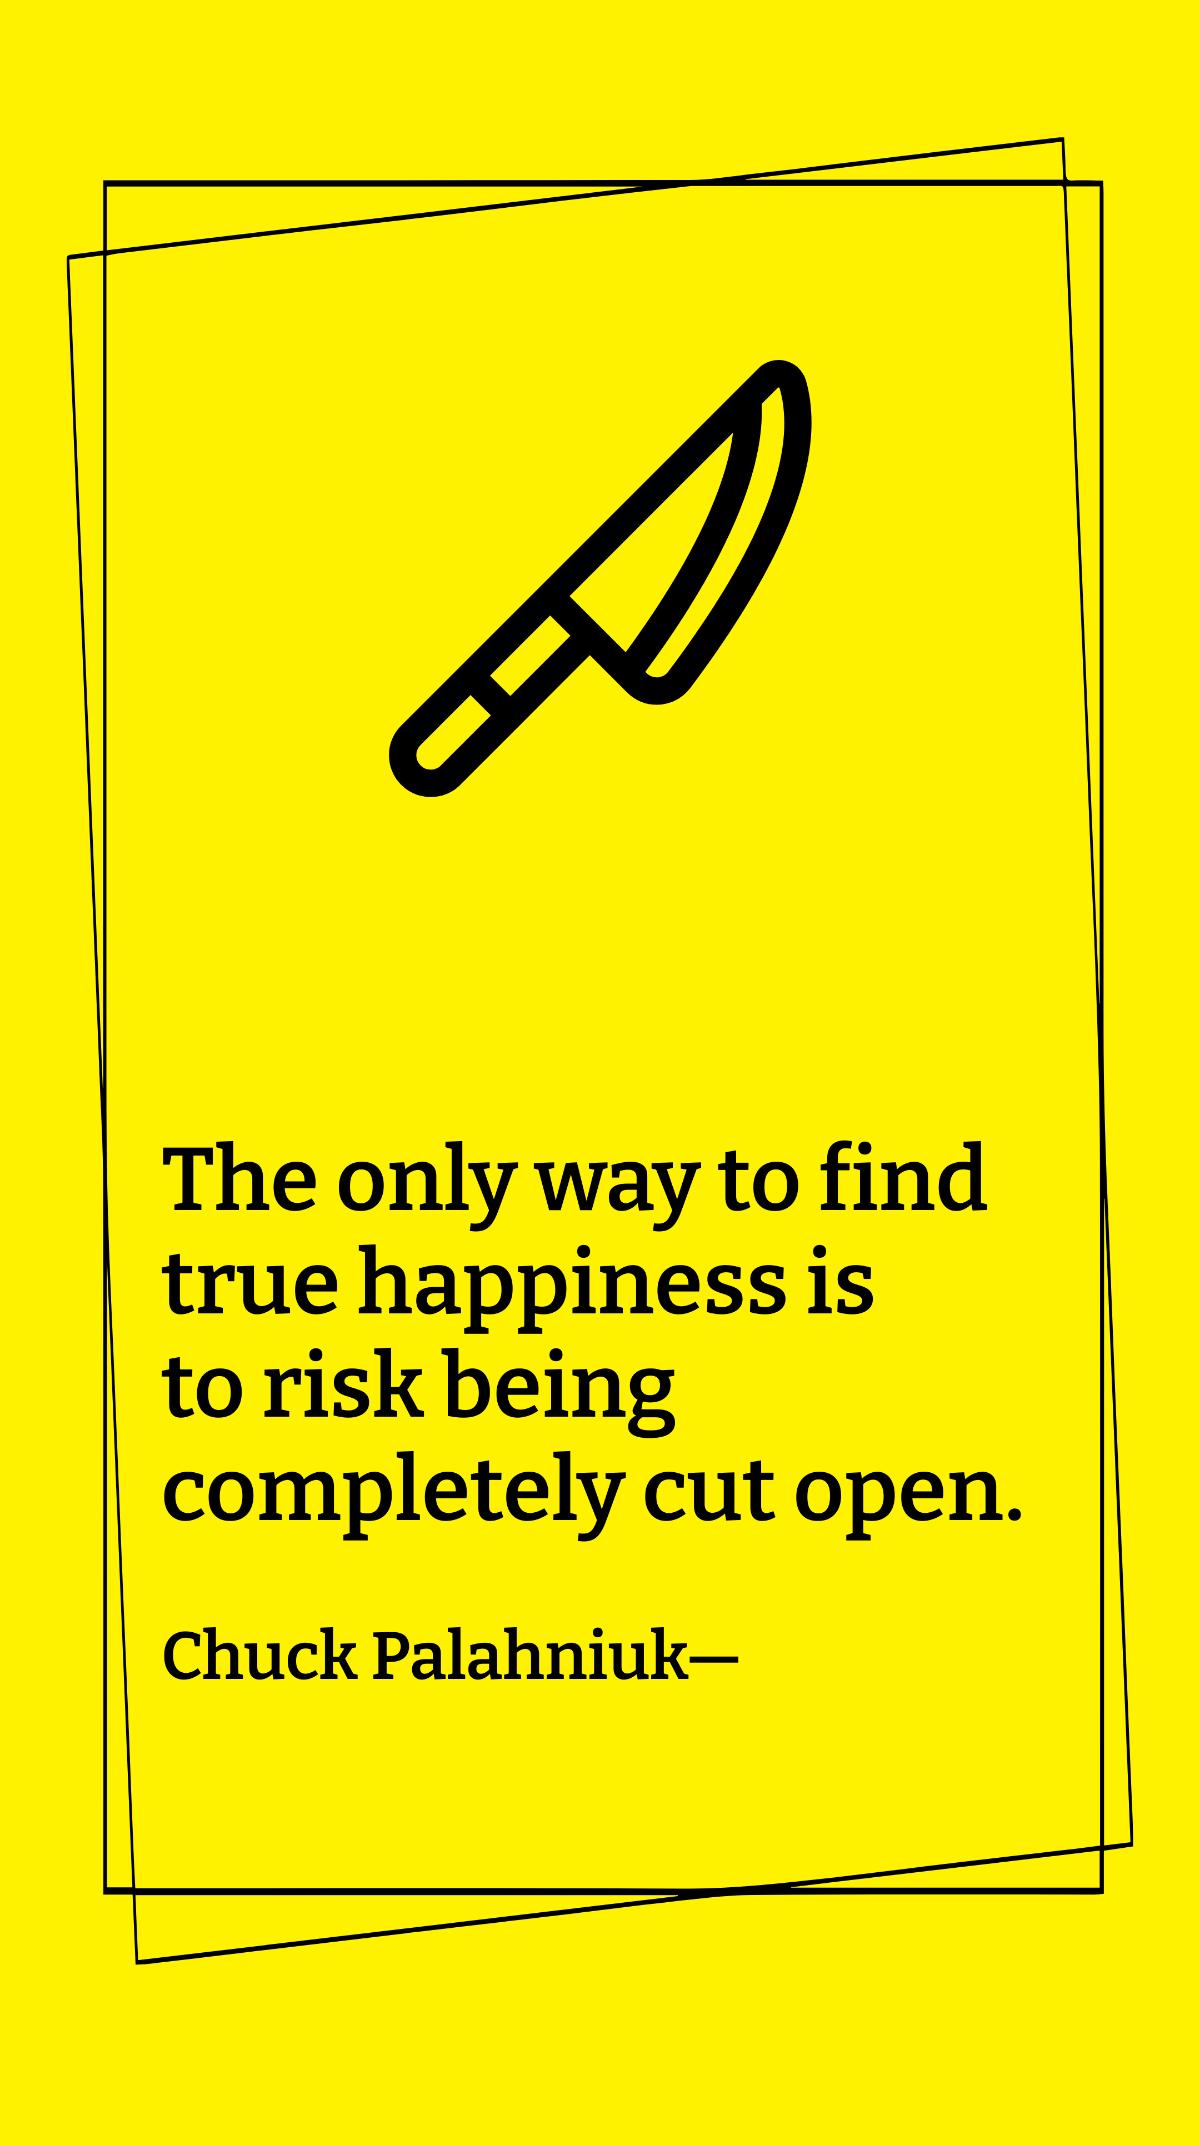 Chuck Palahniuk - The only way to find true happiness is to risk being completely cut open. Template